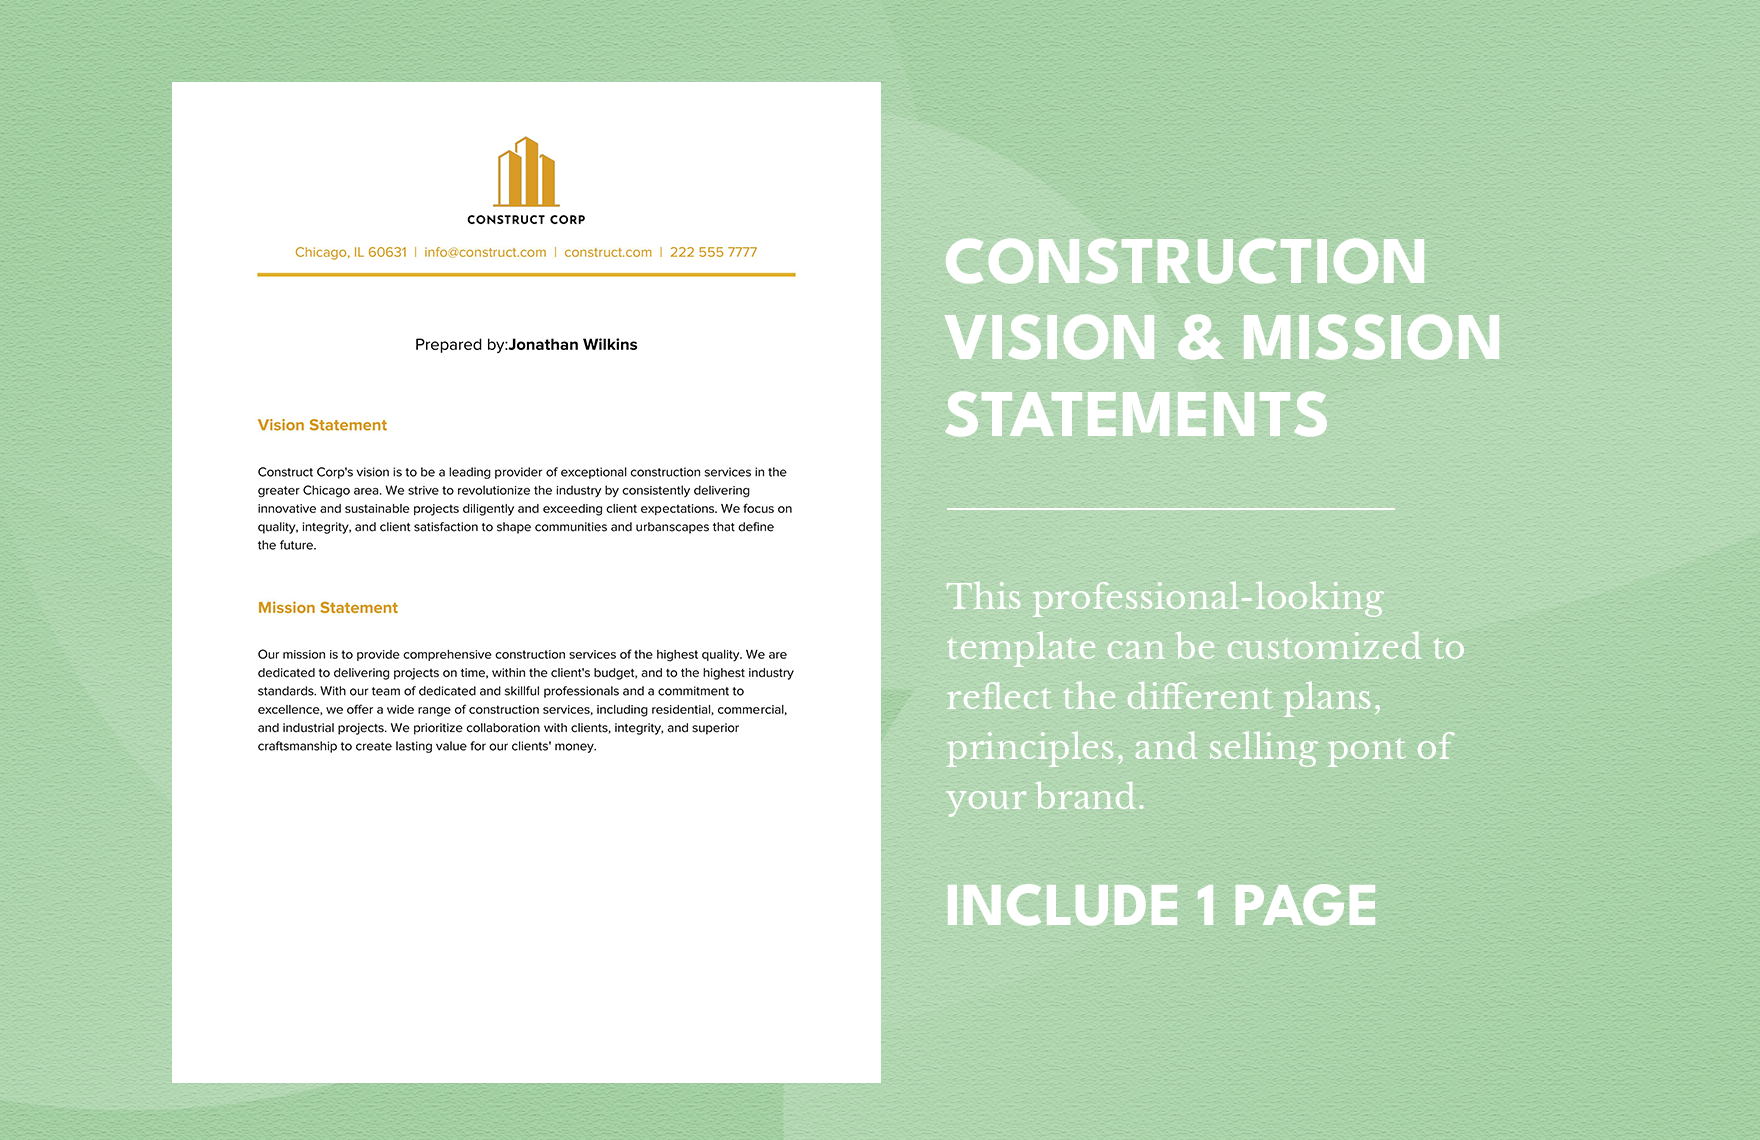 Construction Vision & Mission Statements in Word, Google Docs